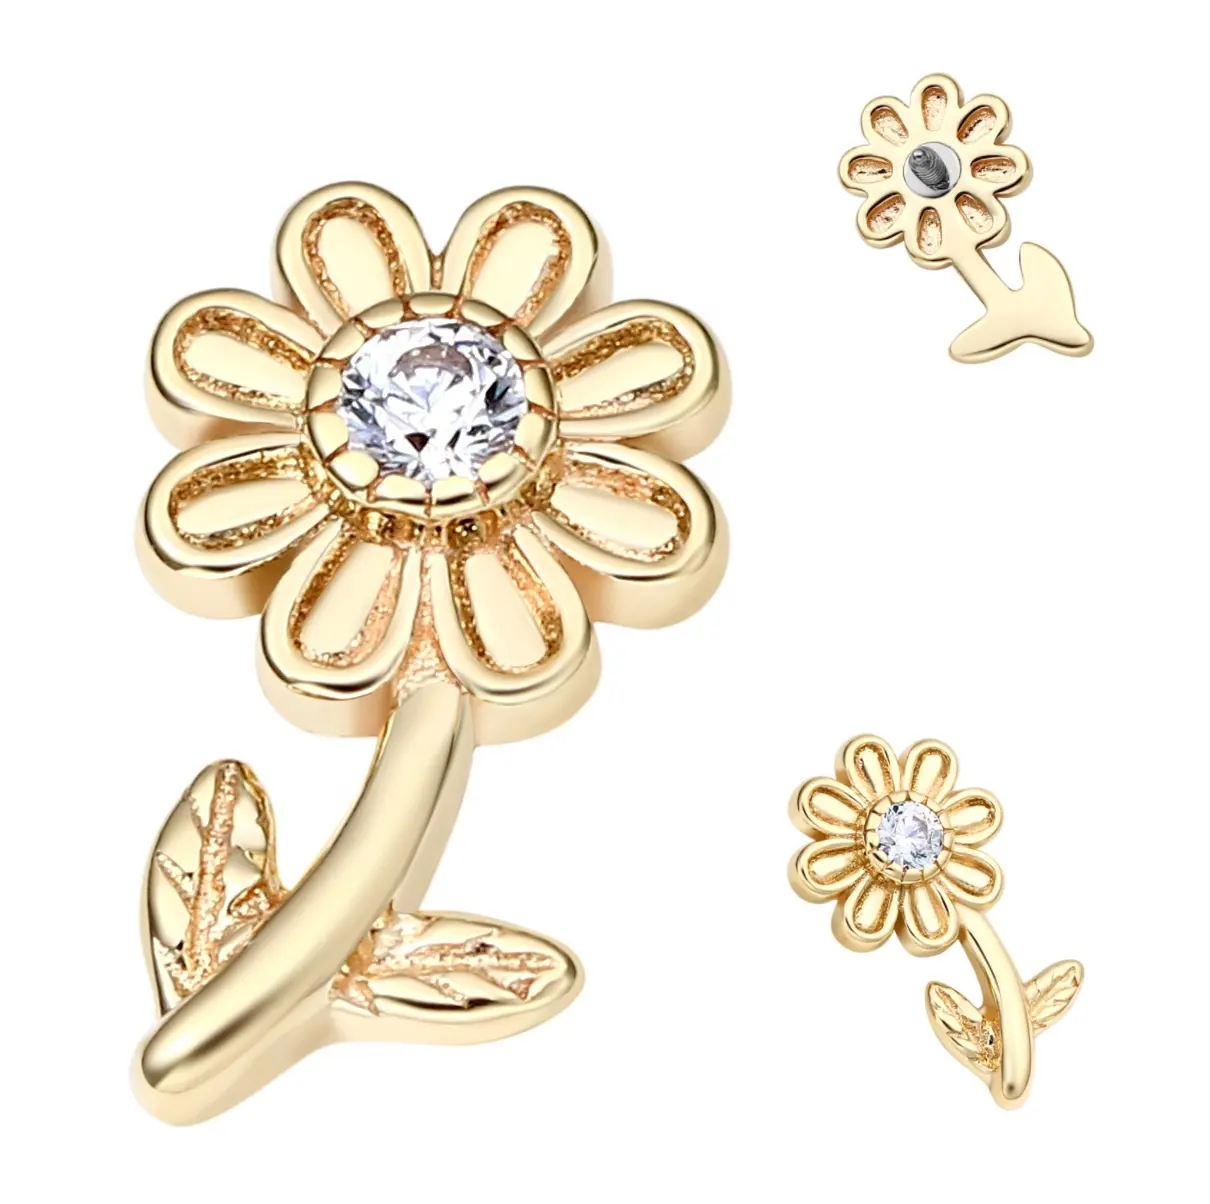 Piercing Stories 14K Yellow Solid Gold Flower shaped Threaded Earrings Ends Tragus Body Piercing Jewelry